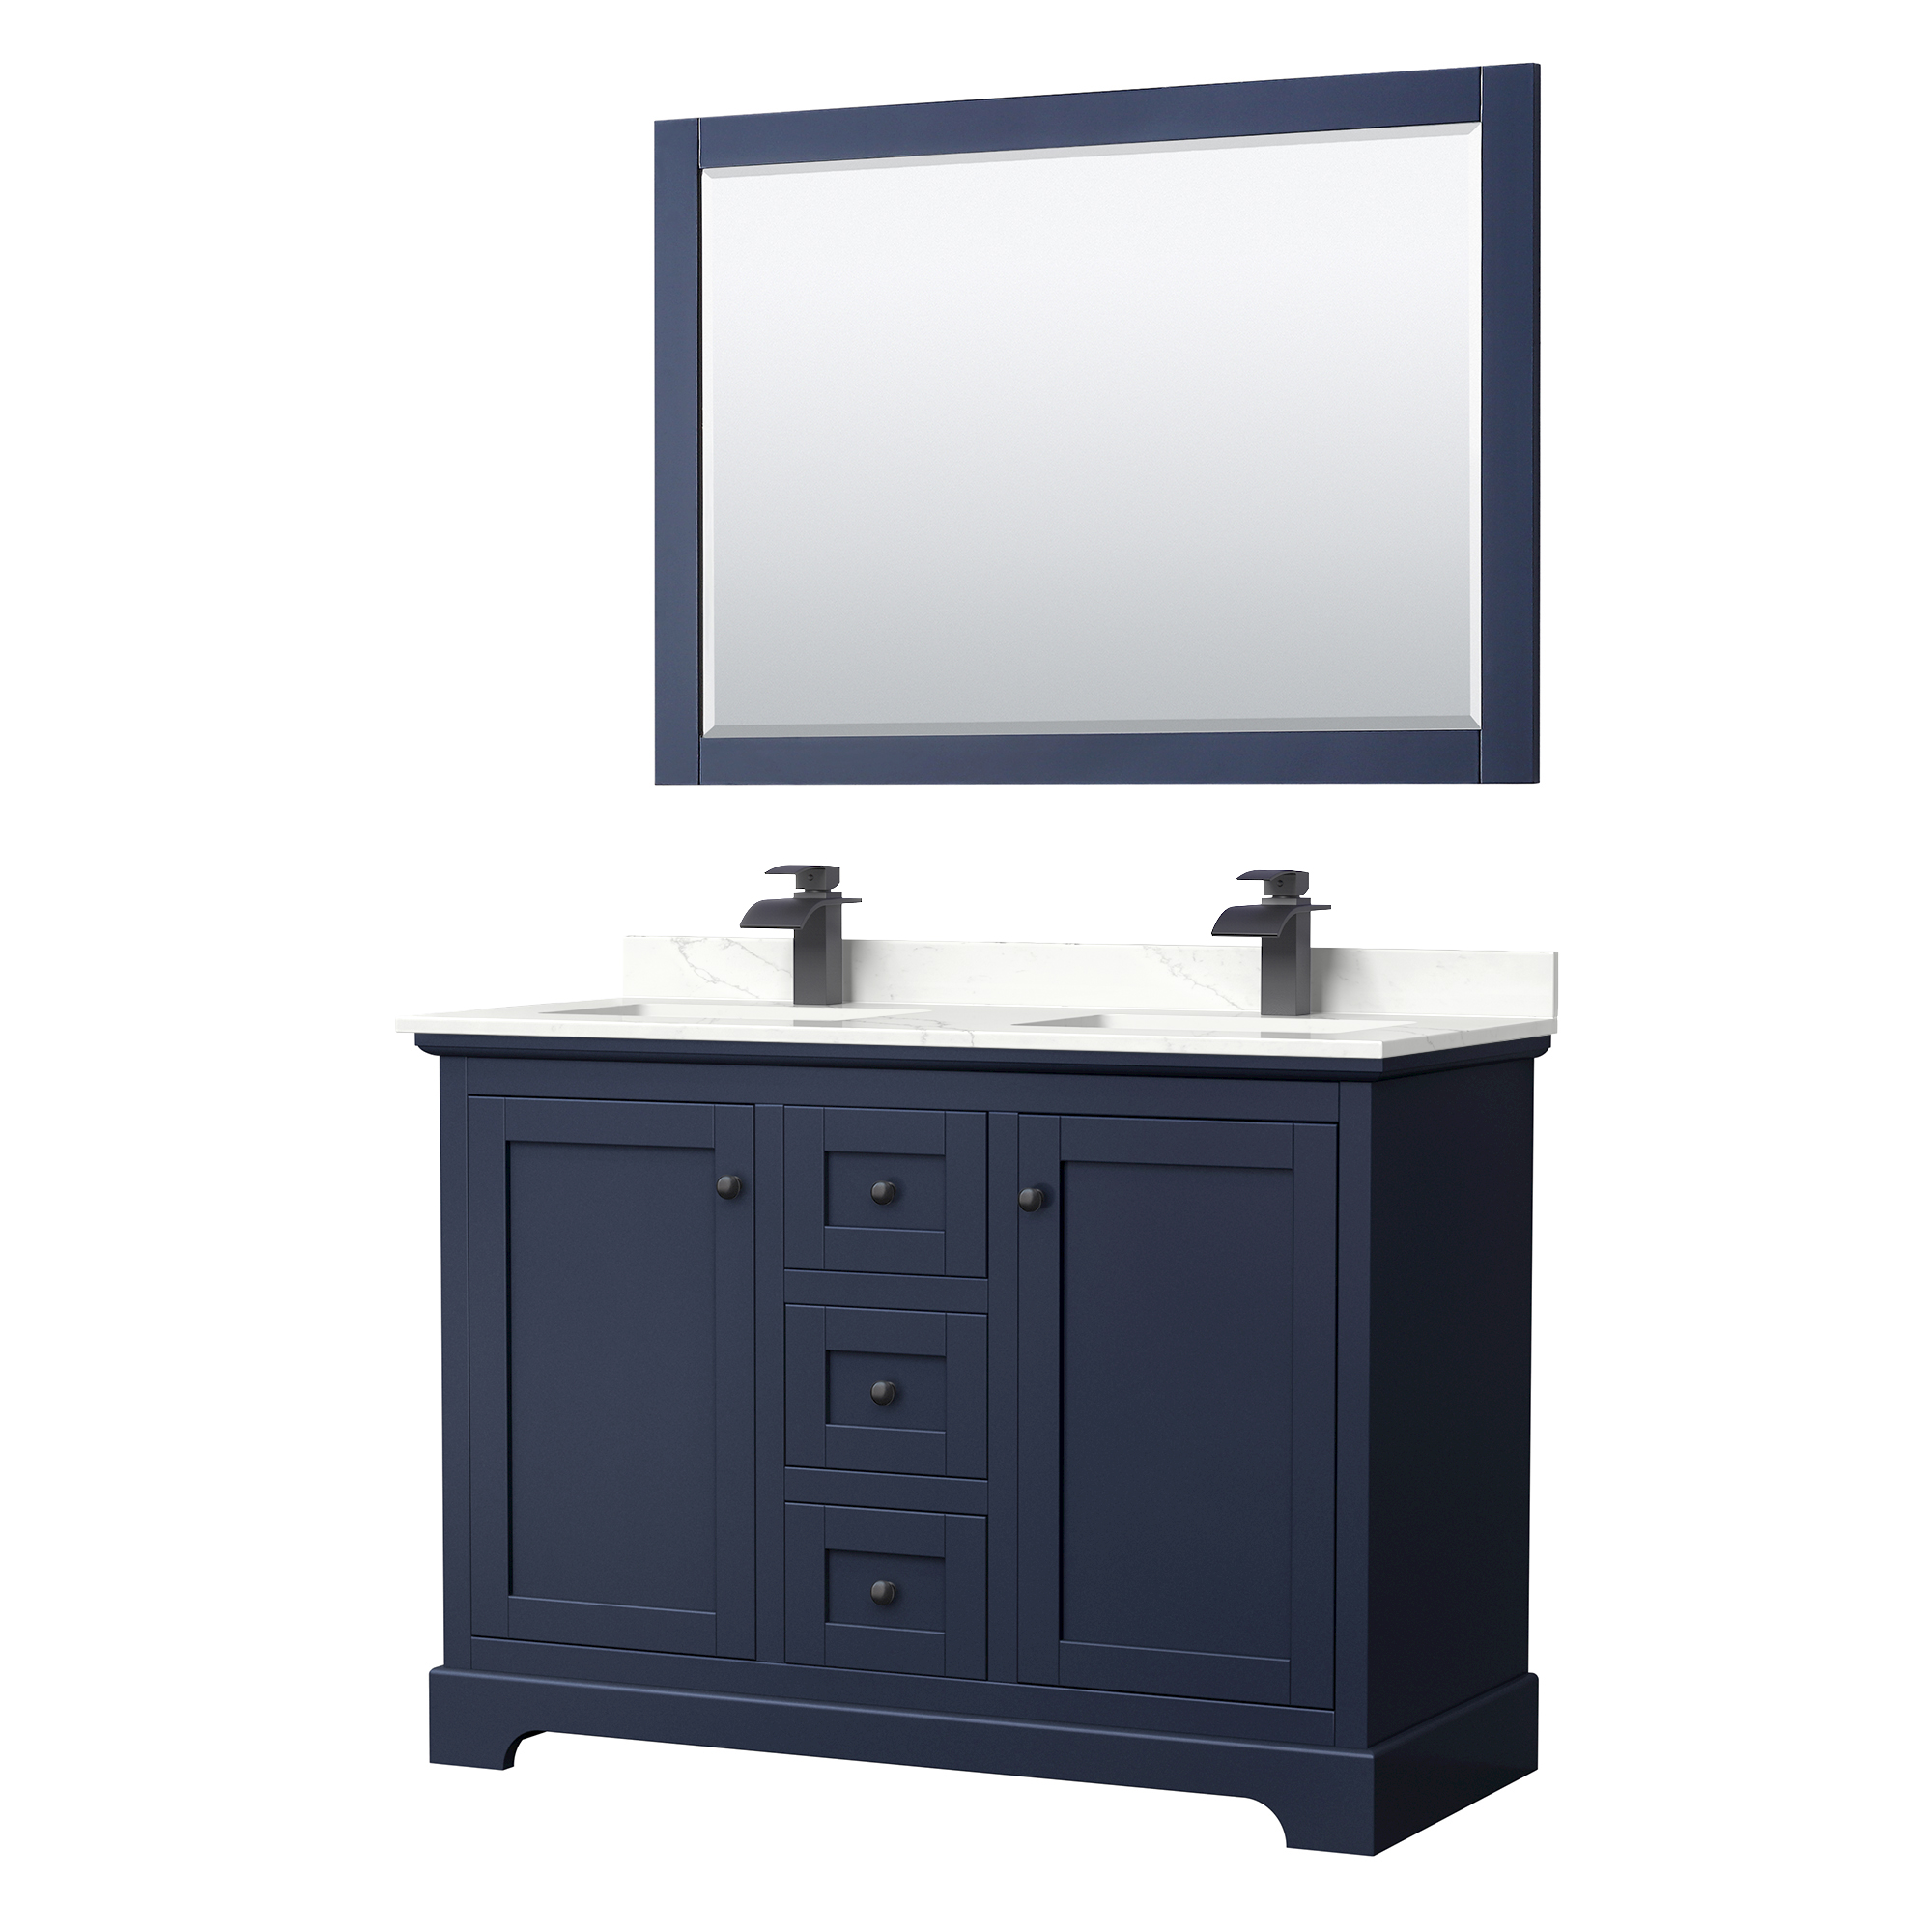 avery 48" double bathroom vanity by wyndham collection - dark blue